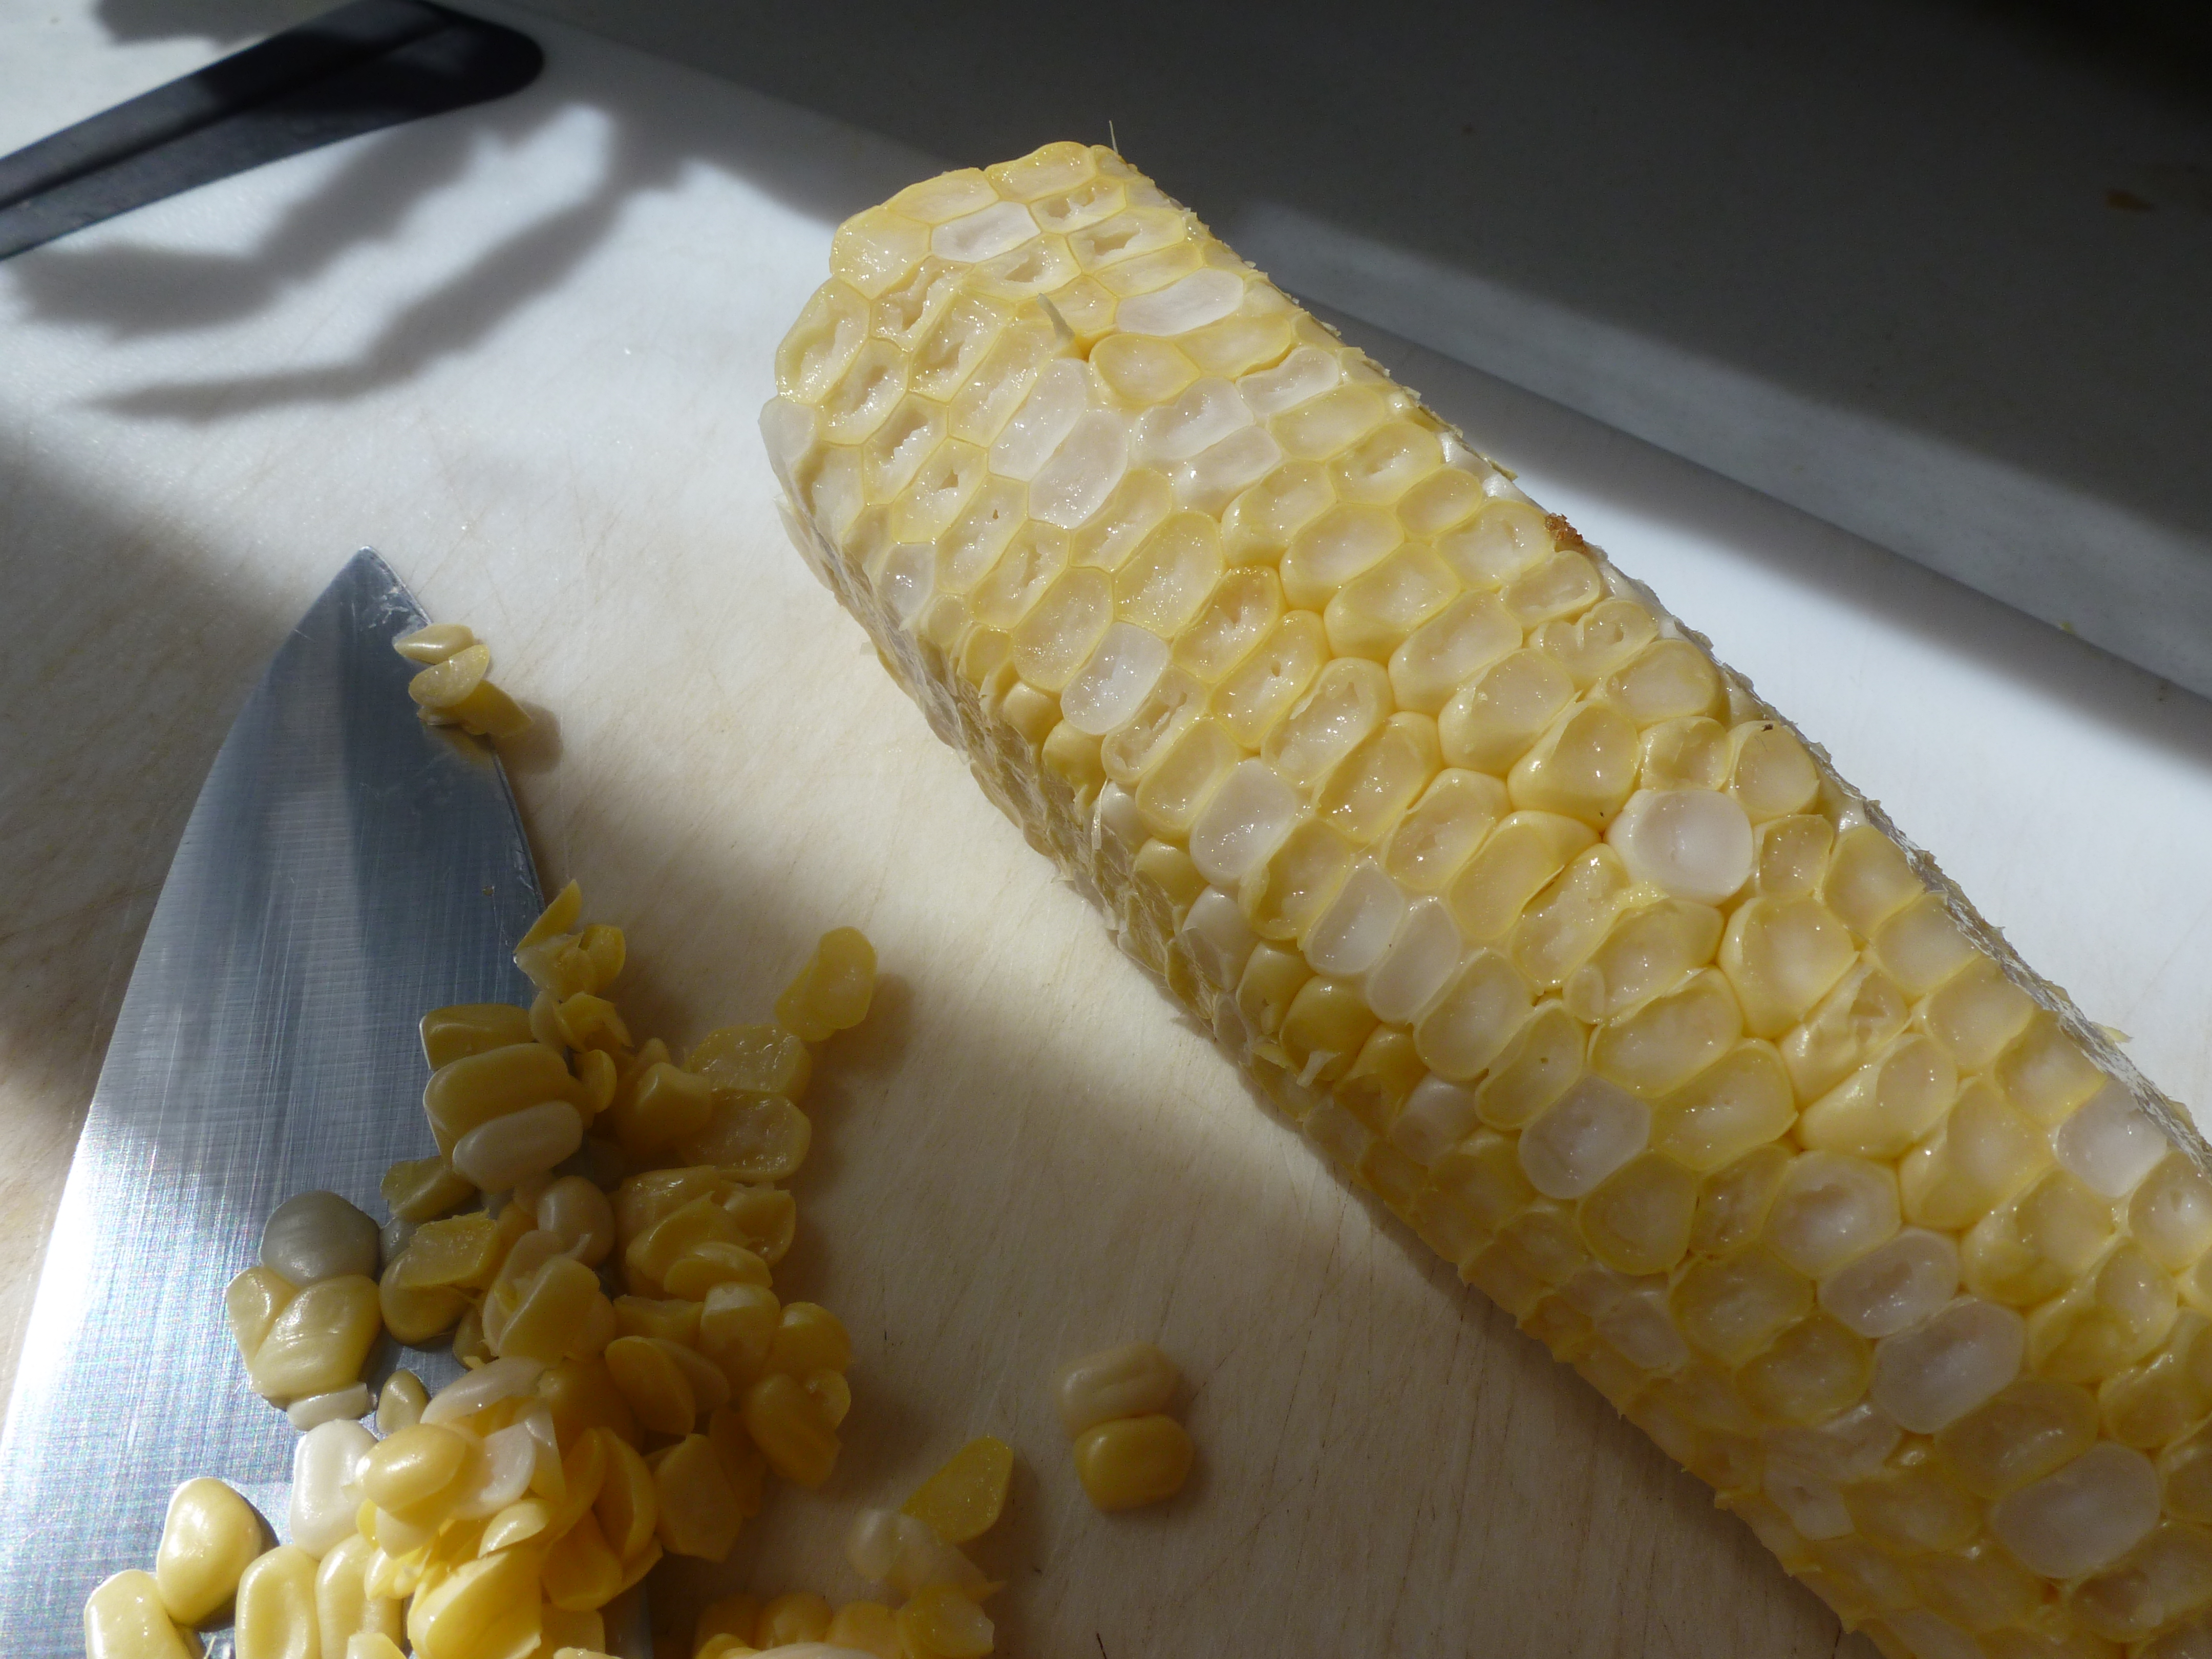 Cutting the tips of the corn kernels to expose the interior